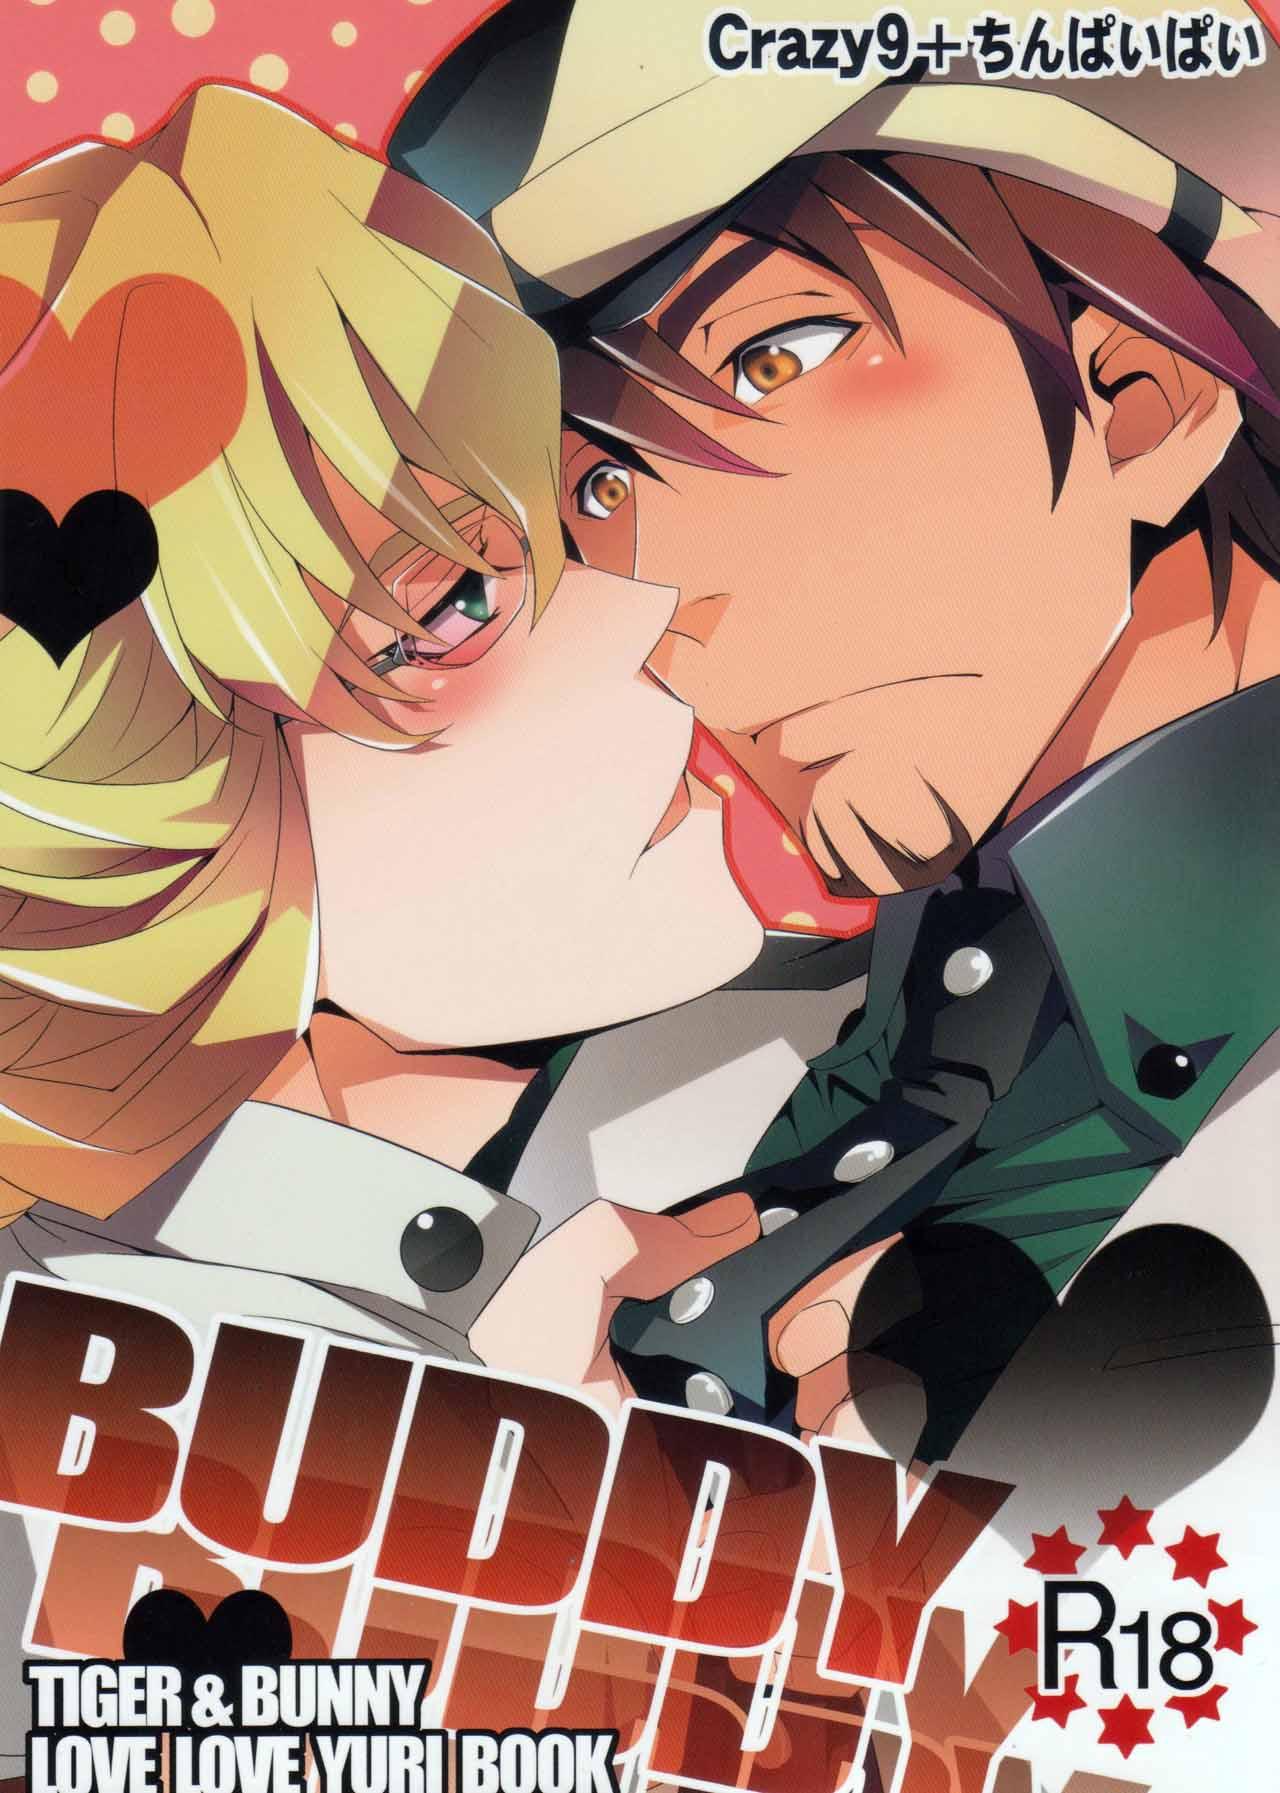 Double Blowjob Buddy - Tiger and bunny Mofos - Page 2